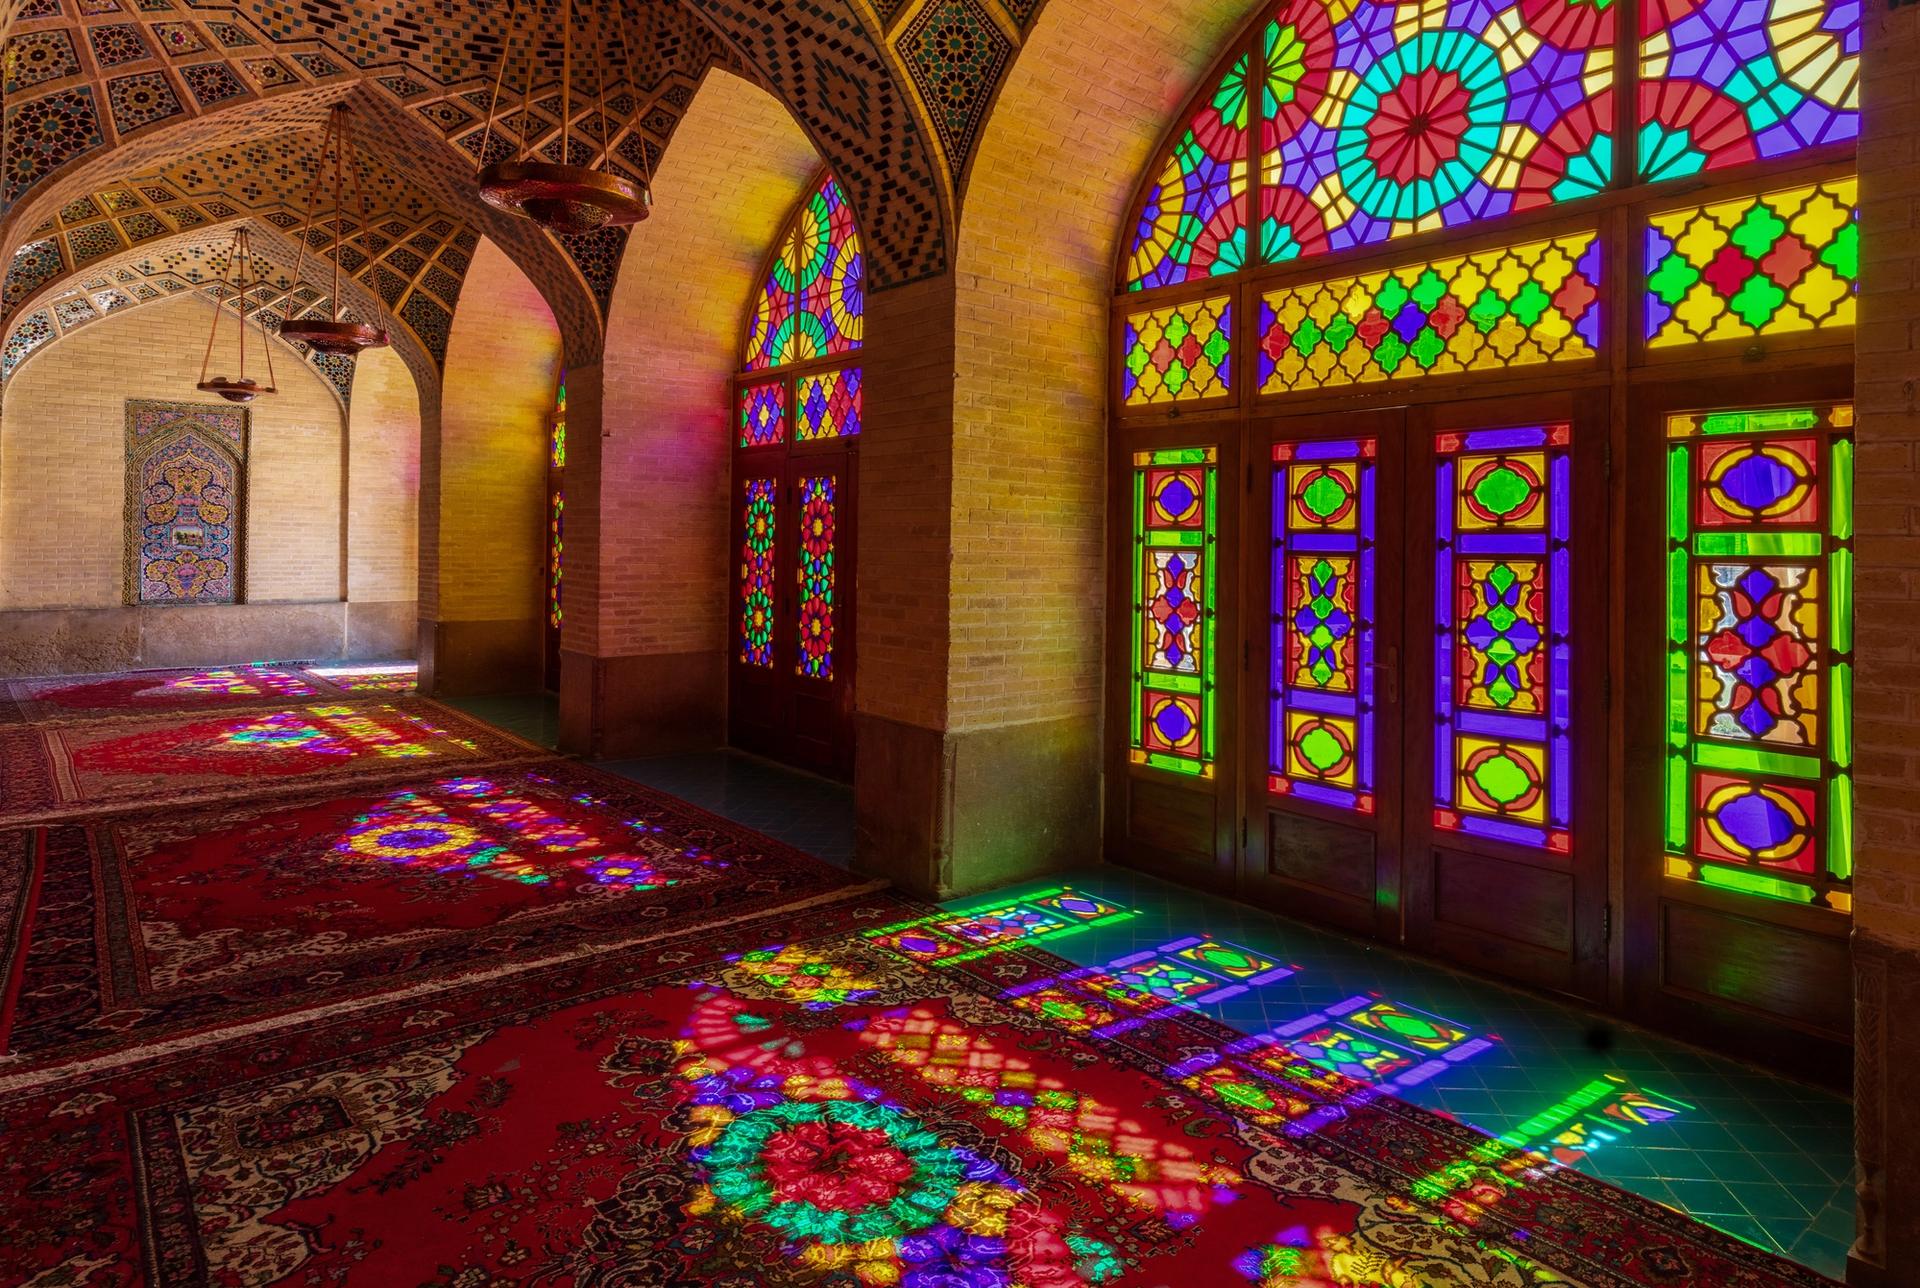 The Nasīr al-Mulk Mosque in Shiraz, also known as the Pink Mosque, with its rainbow hued stained glass, was among Twitter users' favourite Iranian cultural sites Photo: Diego Delso